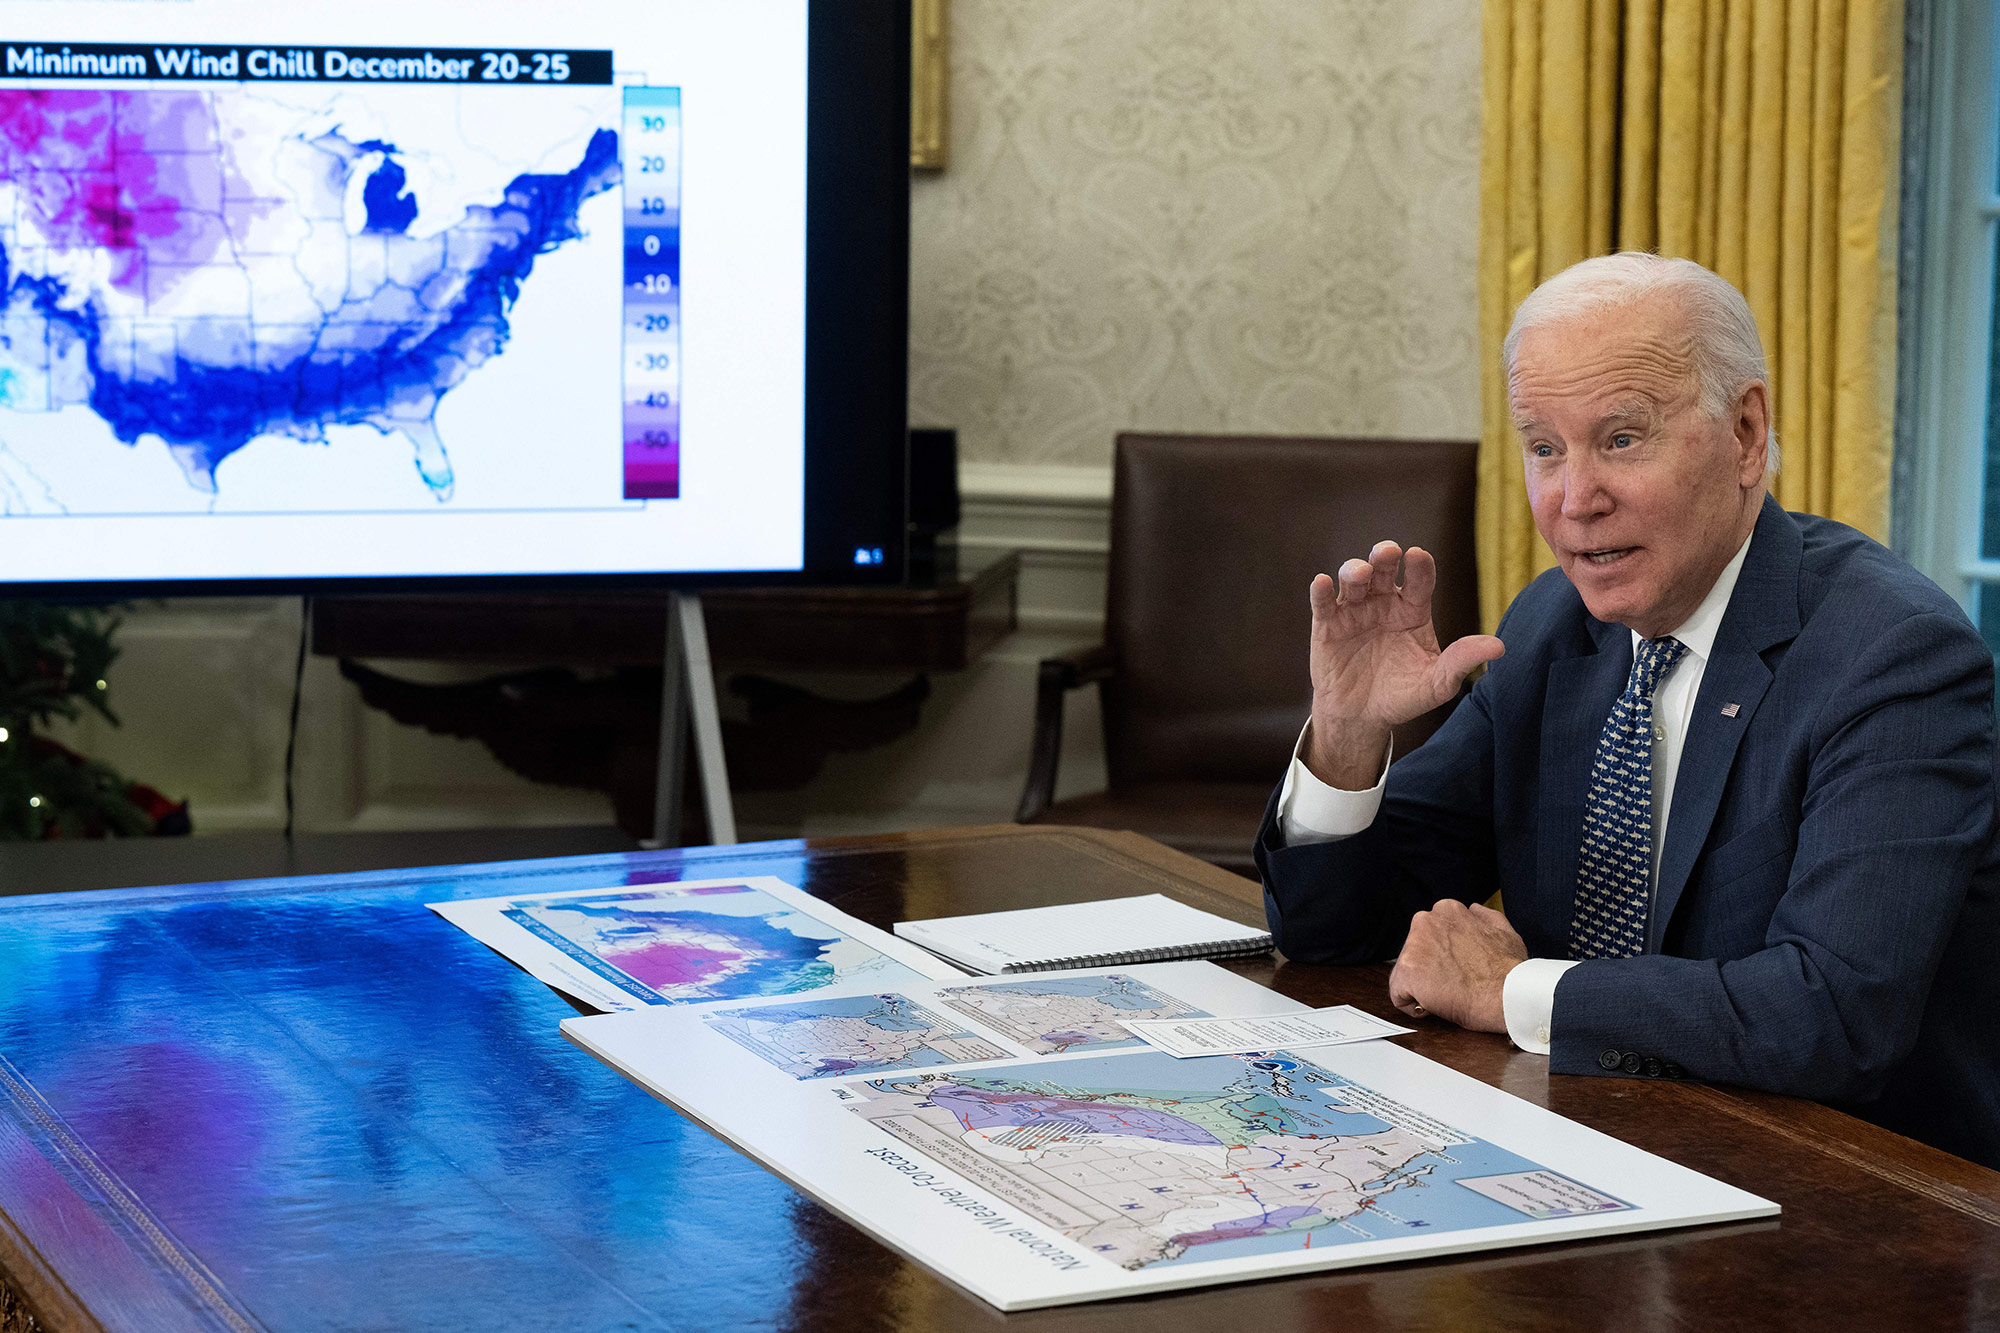 President Joe Biden speaks during a briefing on the winter storm system traversing the US and the expected impacts, in Washington, DC, on December 22.